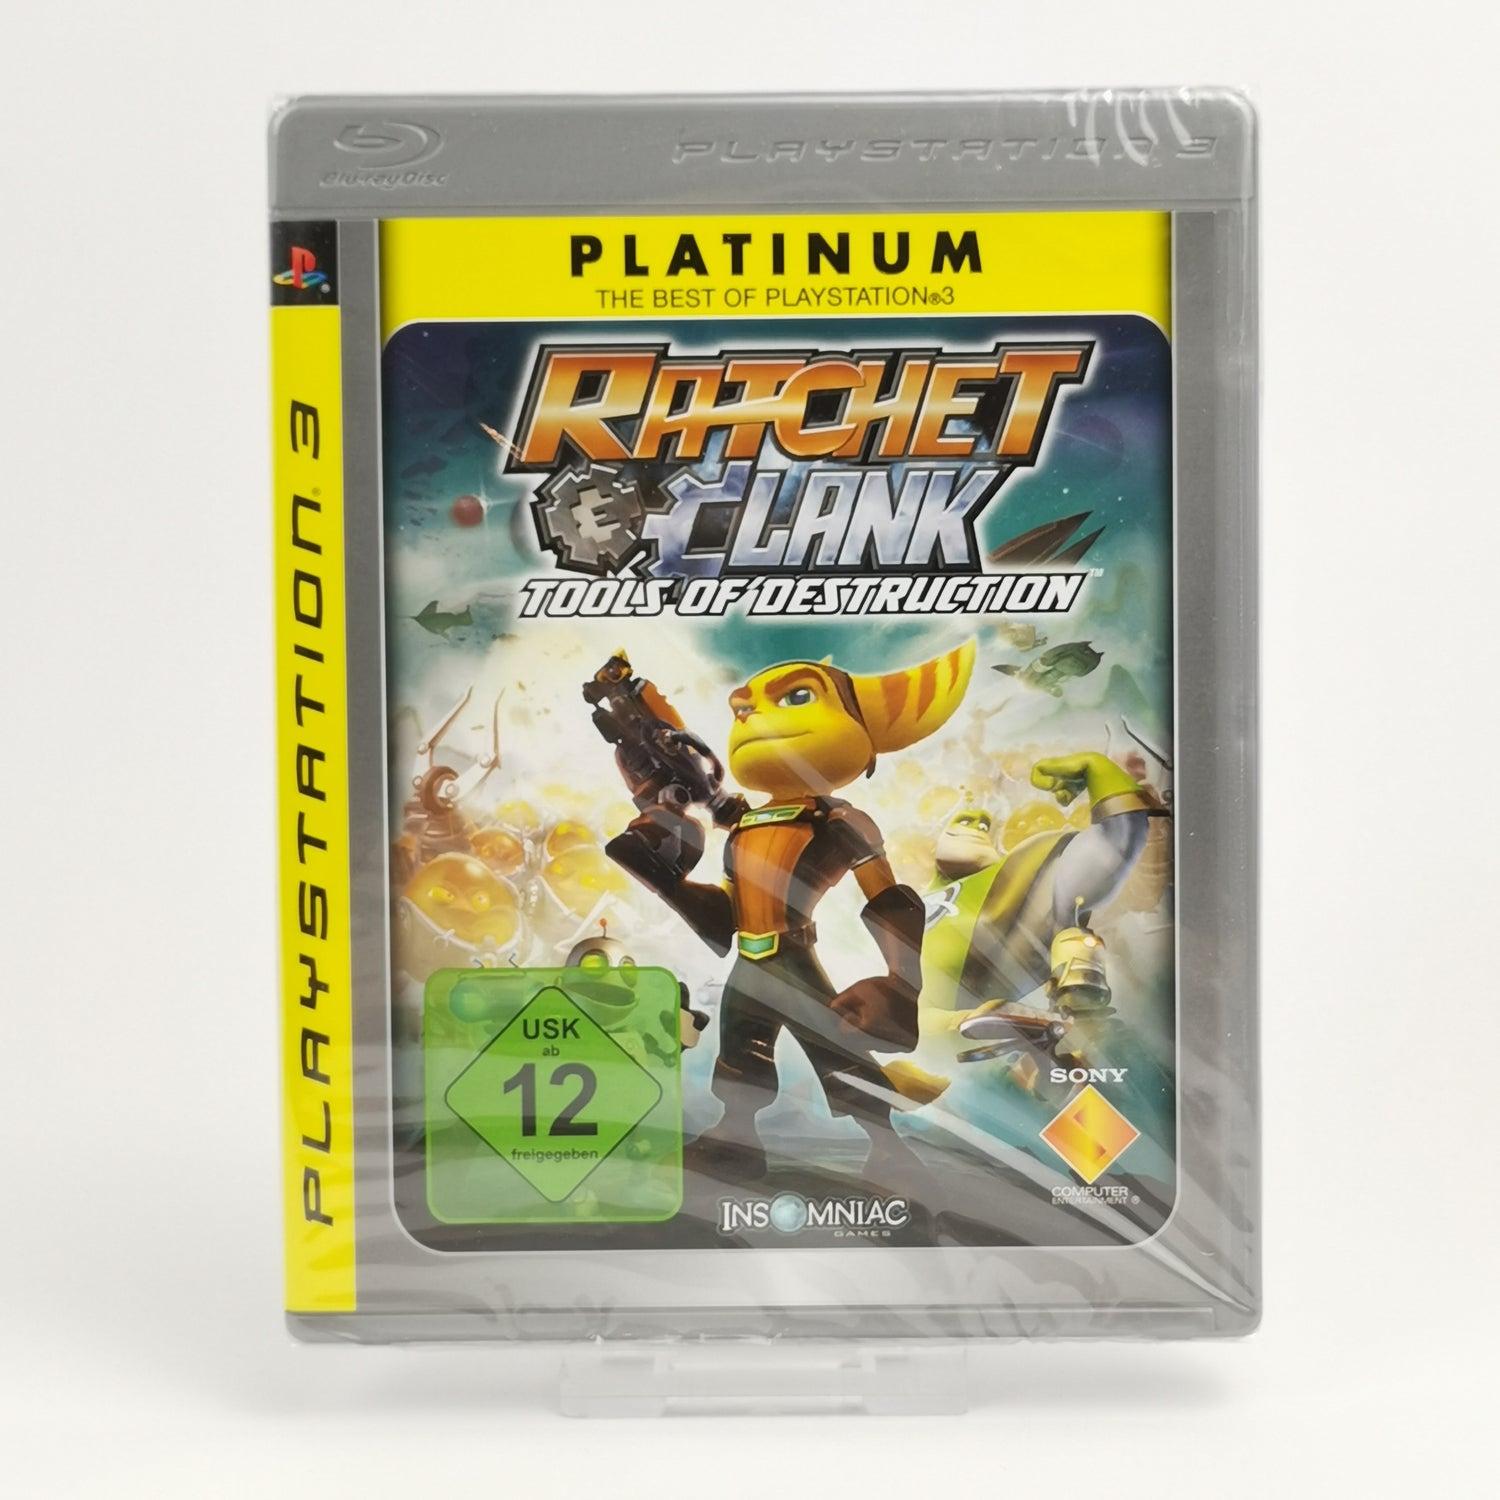 Sony Playstation 3 Game: Ratchet & Clank Tools of Destruction PS3 Platinum NEW